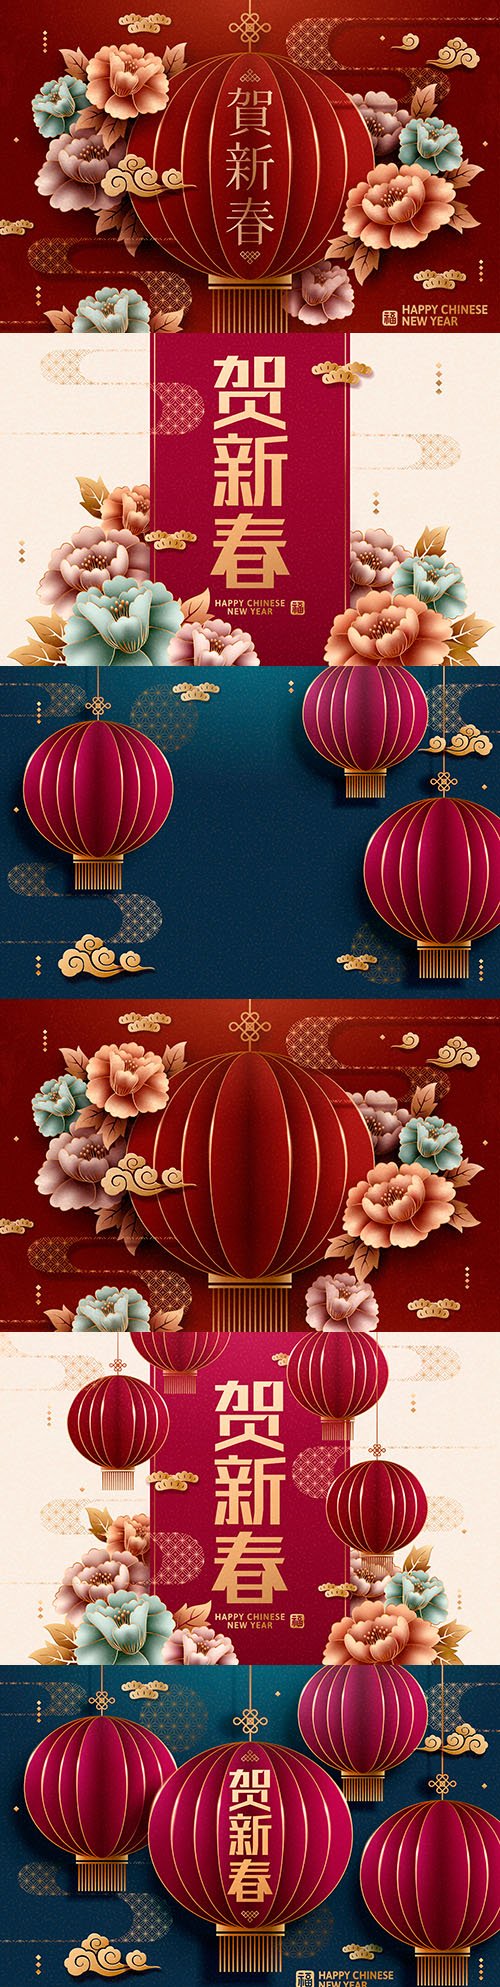 Chinese style paper art red lantern and peony background